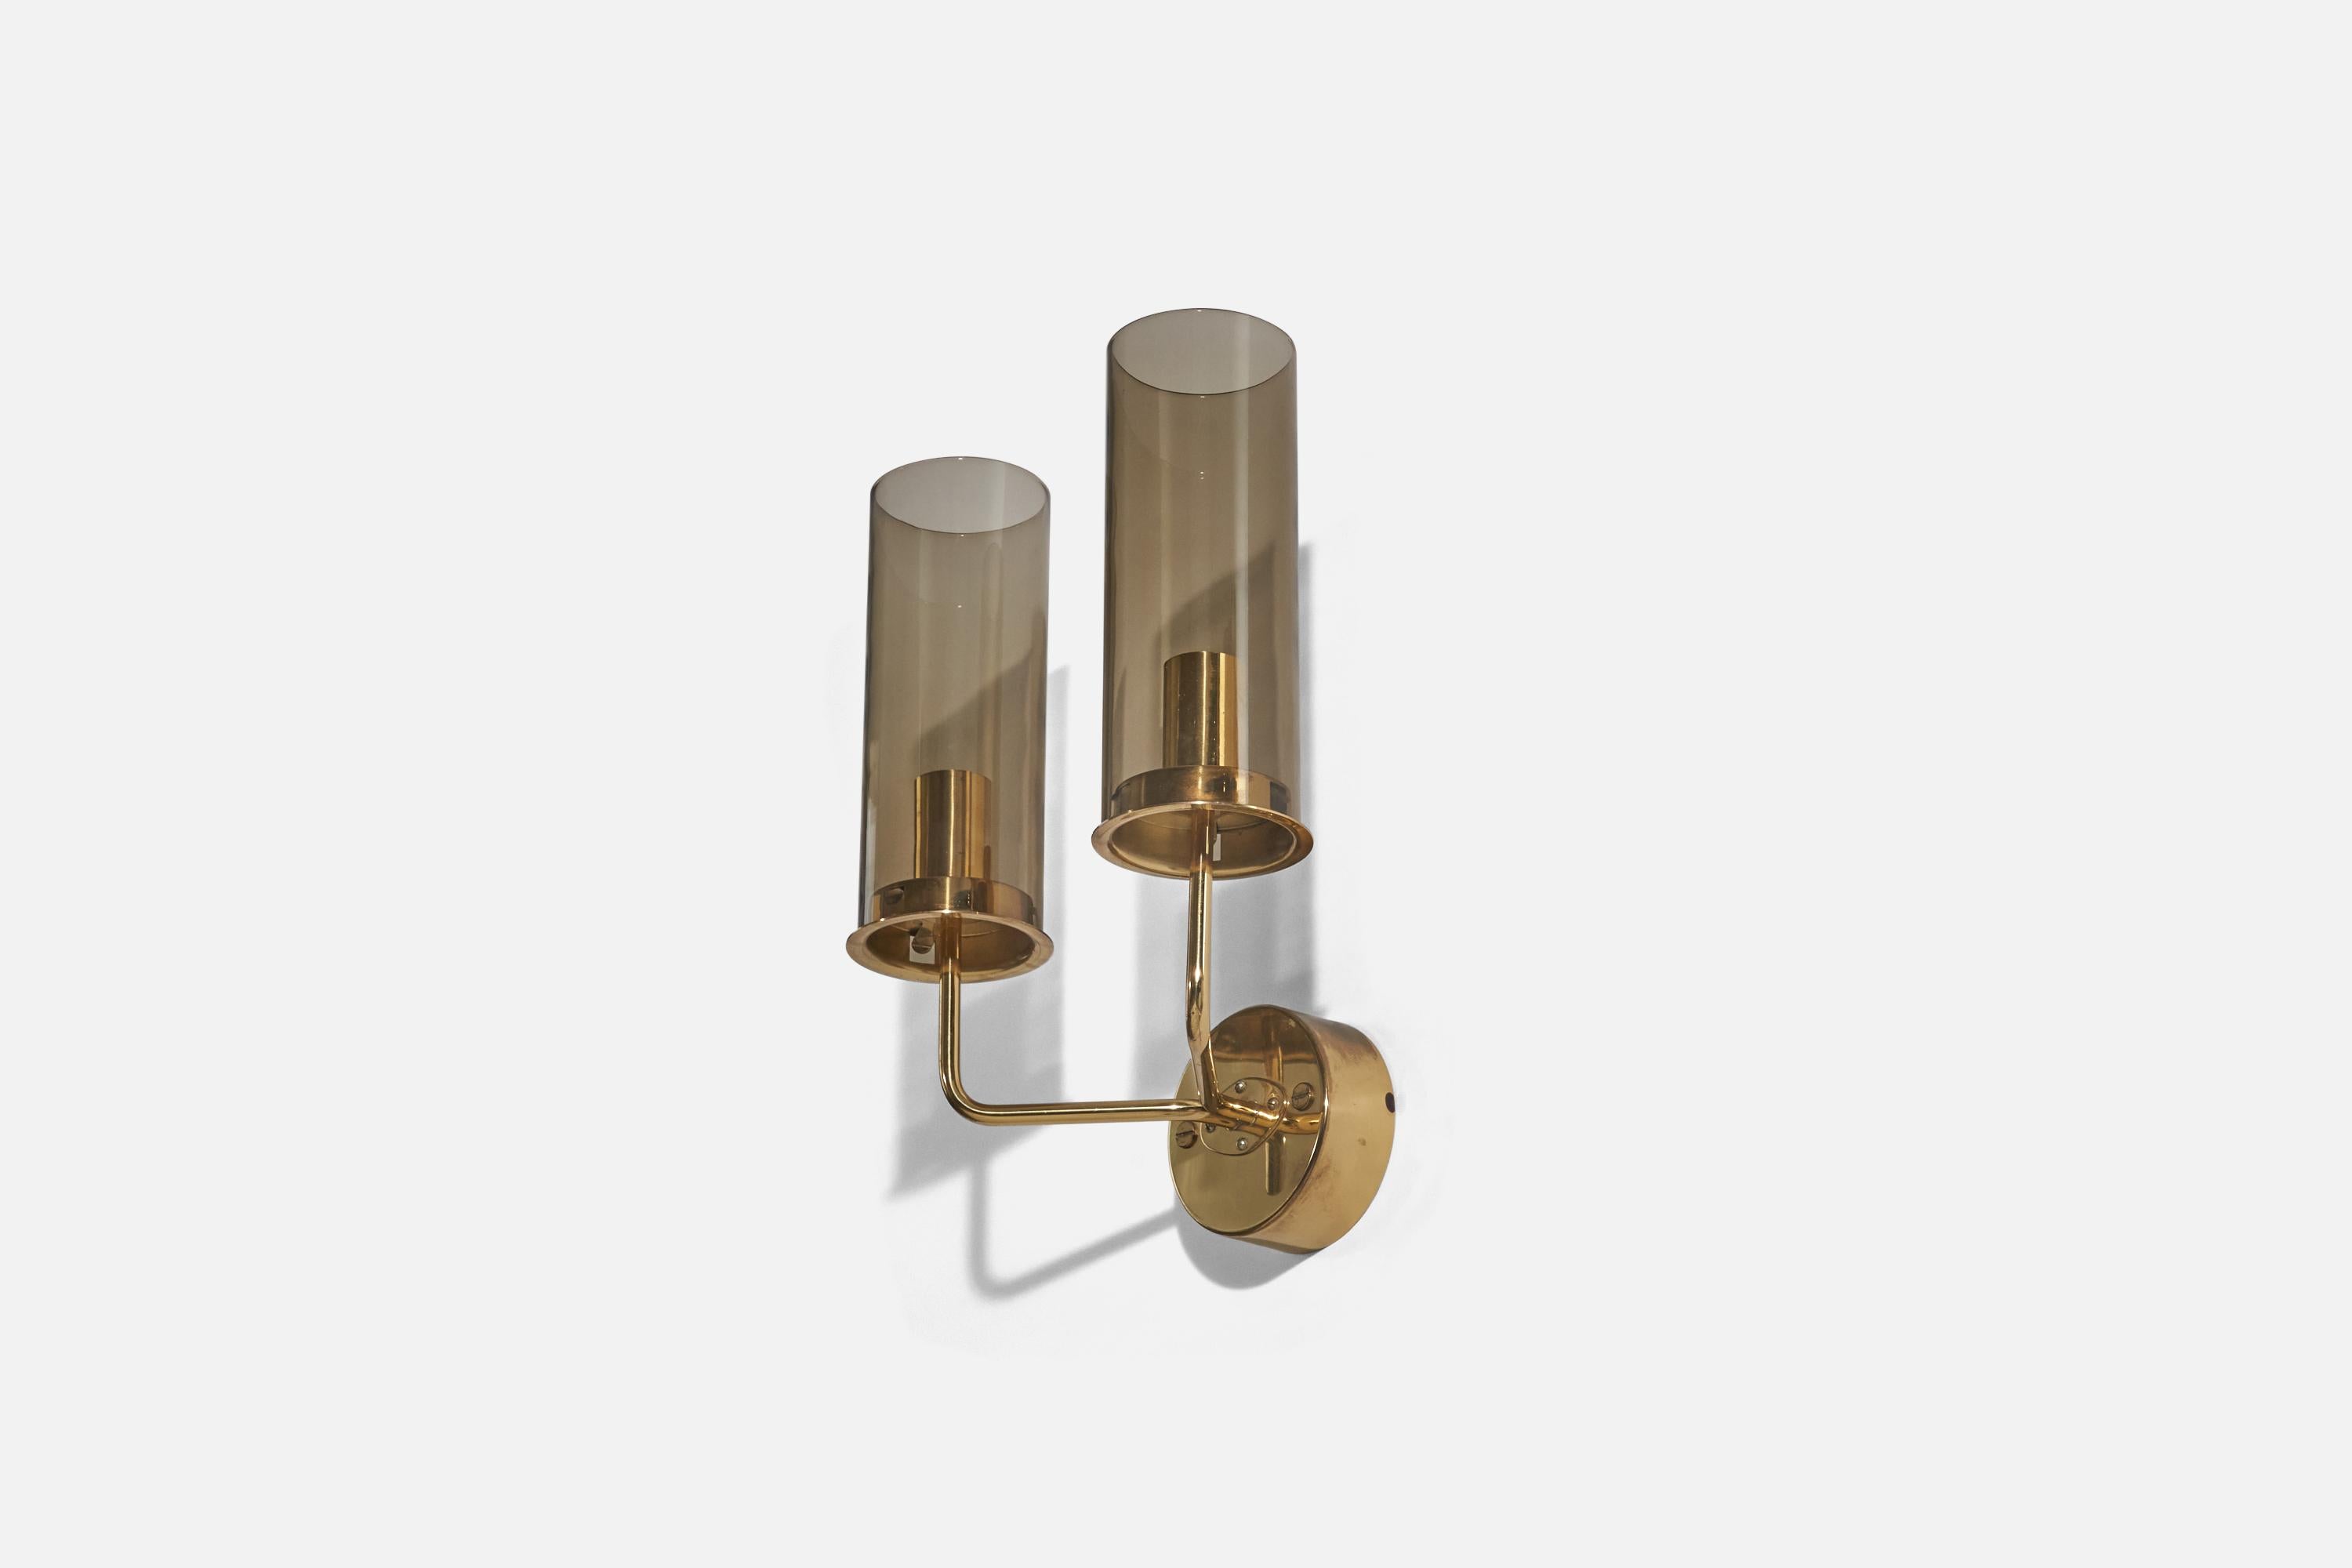 A brass and glass sconce/ wall light designed by Hans-Agne Jakobsson and produced by his own firm in Markaryd, Sweden. c. 1970s.

Dimensions of back plate (inches) : 4.07 x 4.07 x 1.60 (height x width x depth).

Socket takes E-14 bulb. 
The